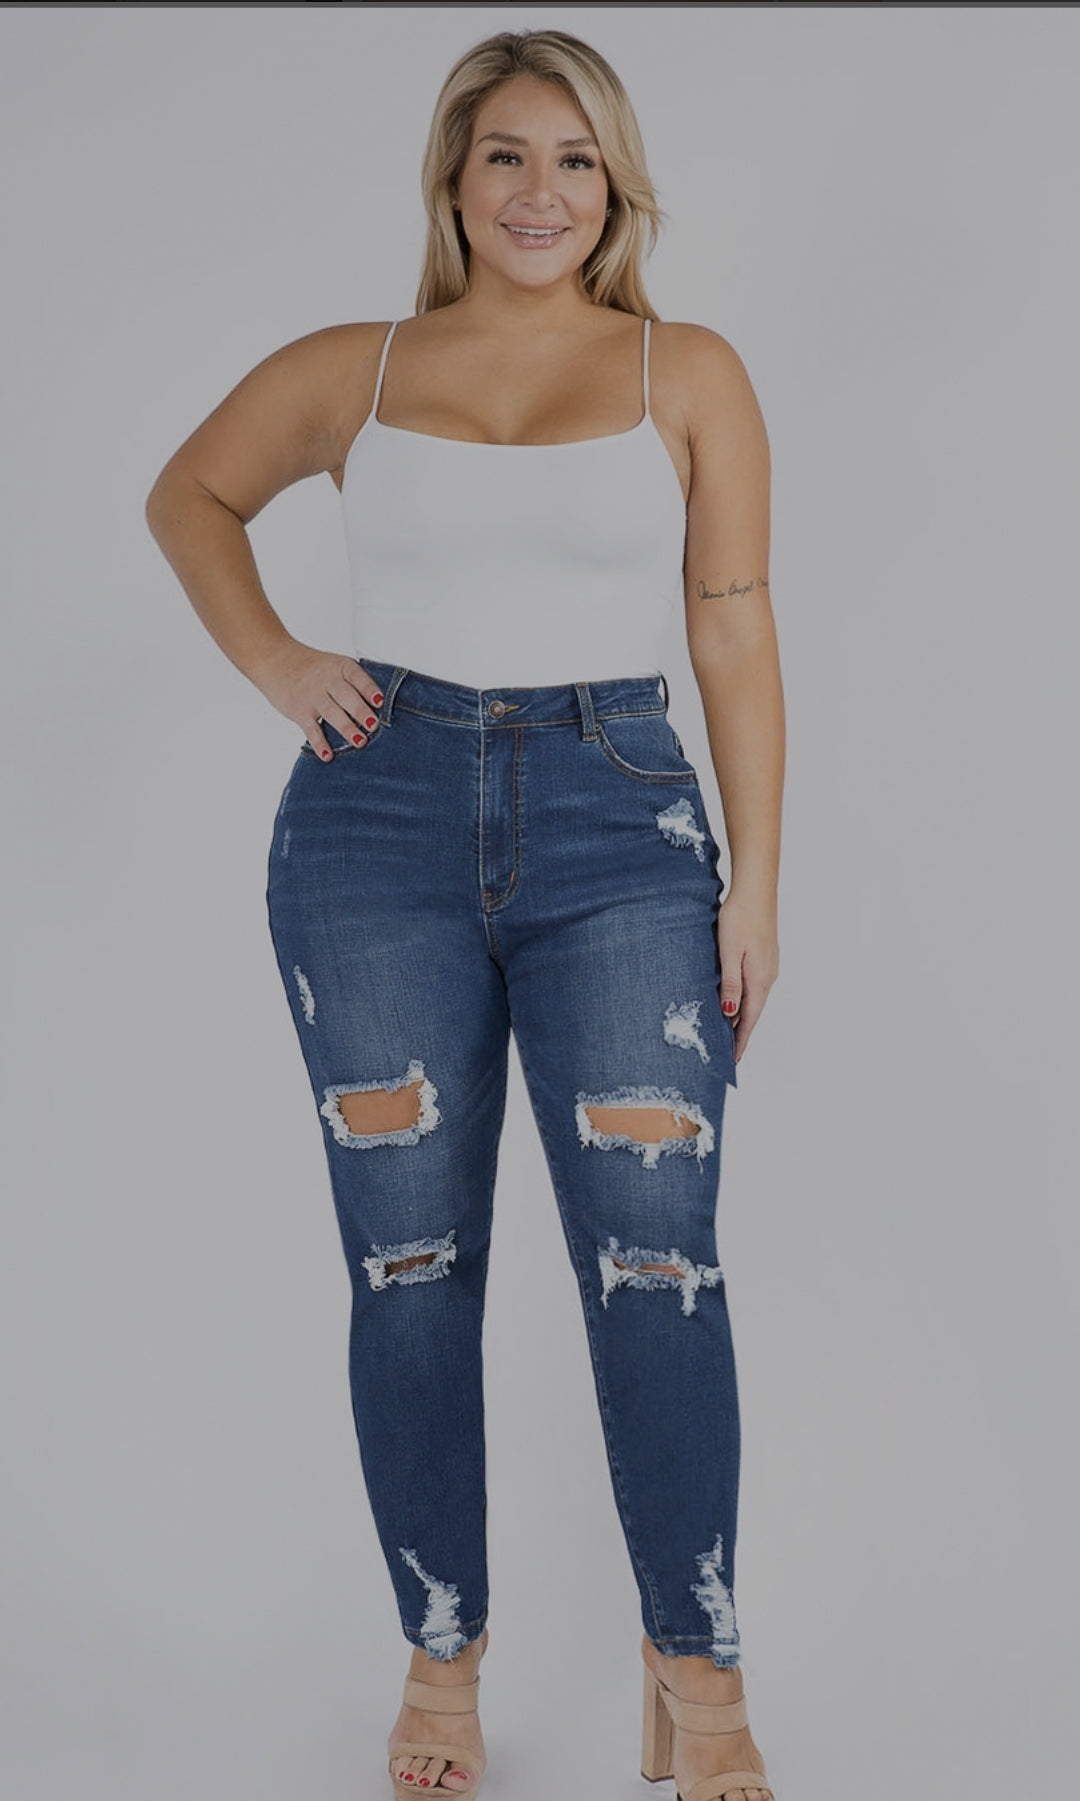 high waisted ripped jeans plus size